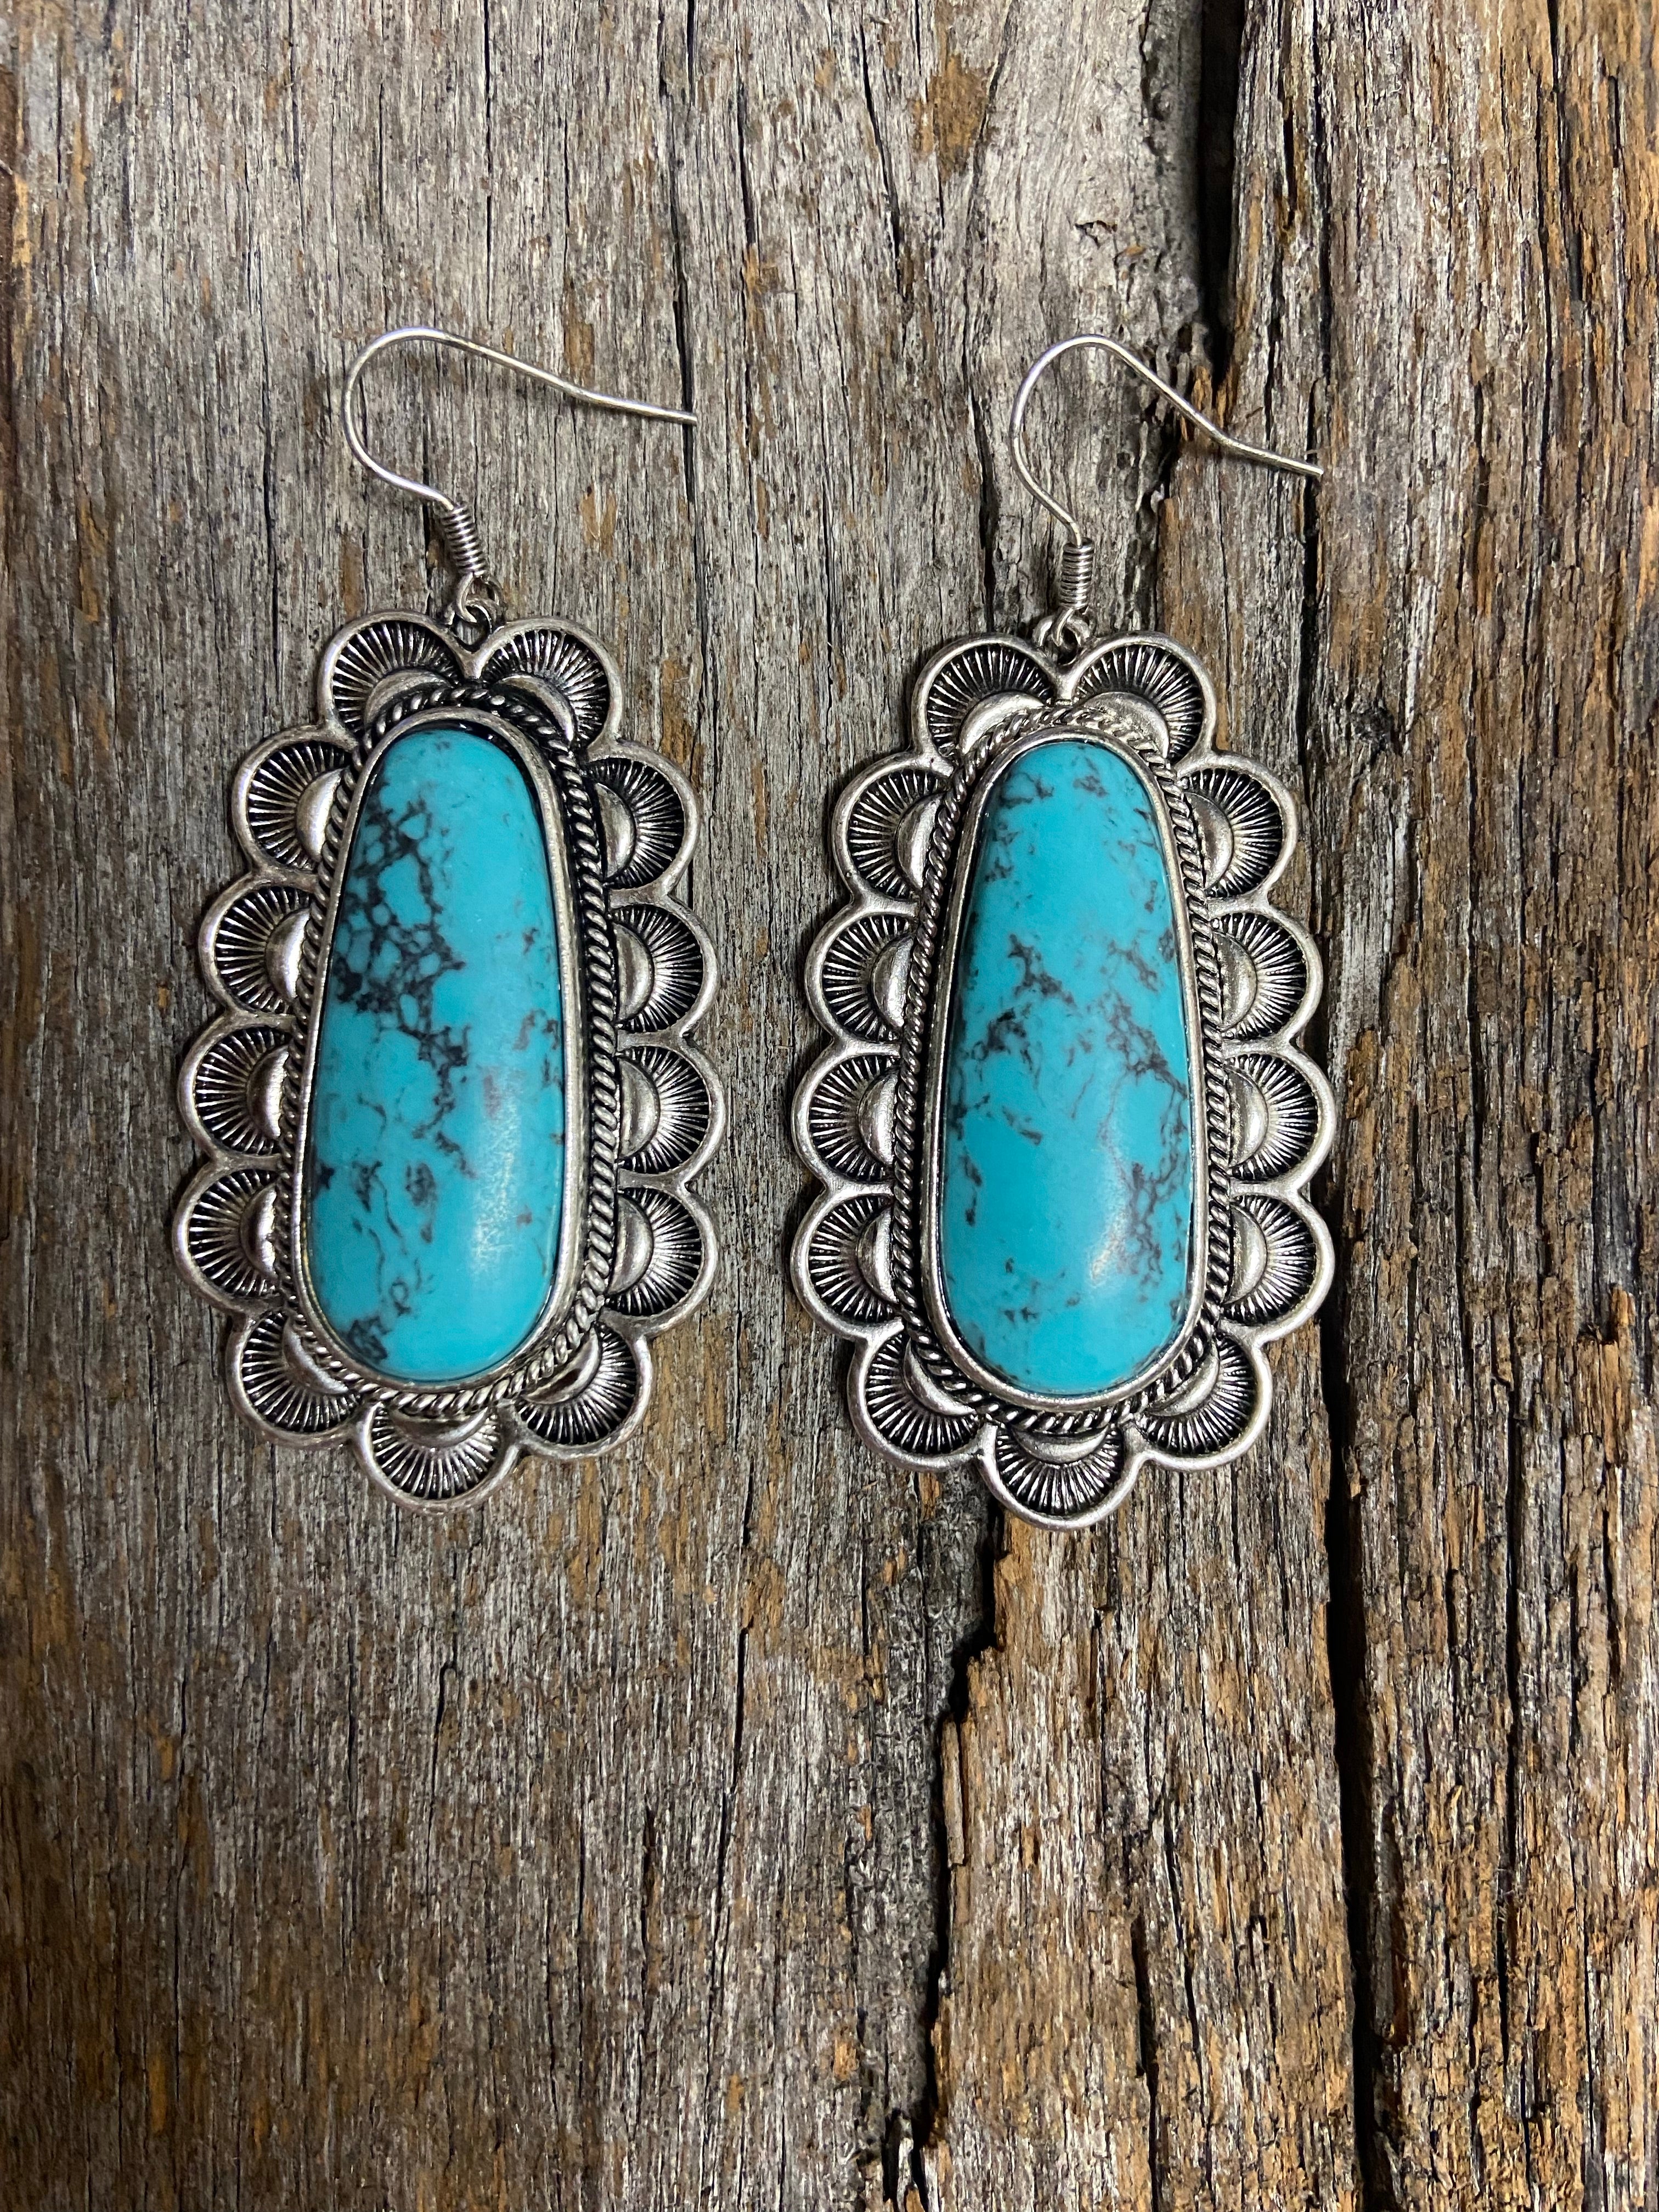 Western Earrings  Antique Silver and Turquoise Stone  Katie B